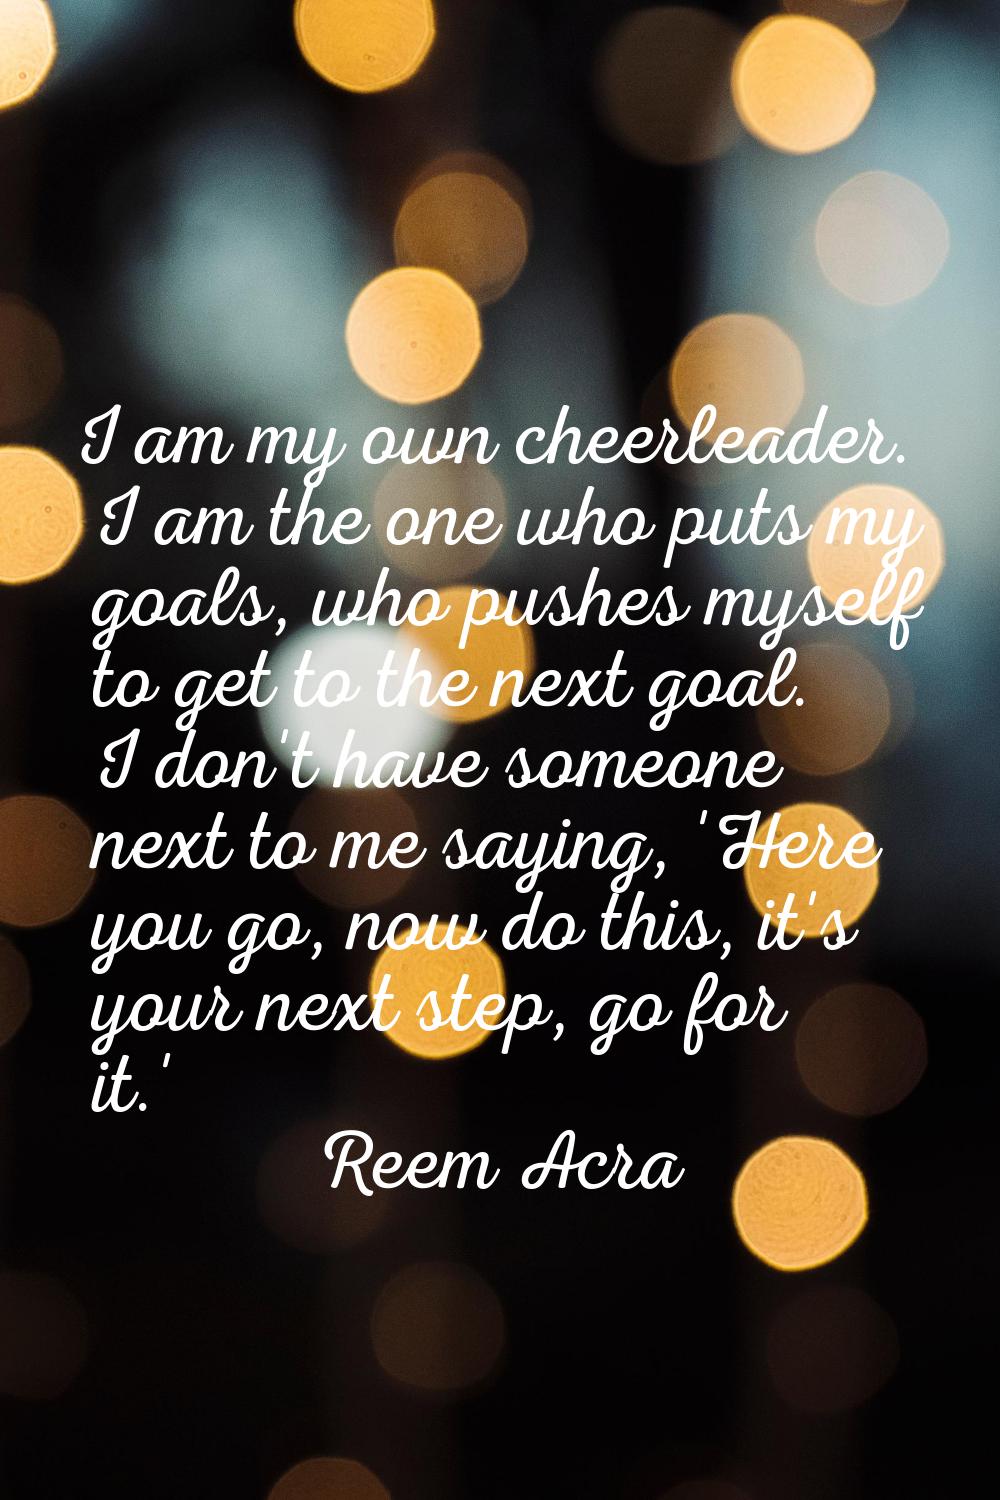 I am my own cheerleader. I am the one who puts my goals, who pushes myself to get to the next goal.